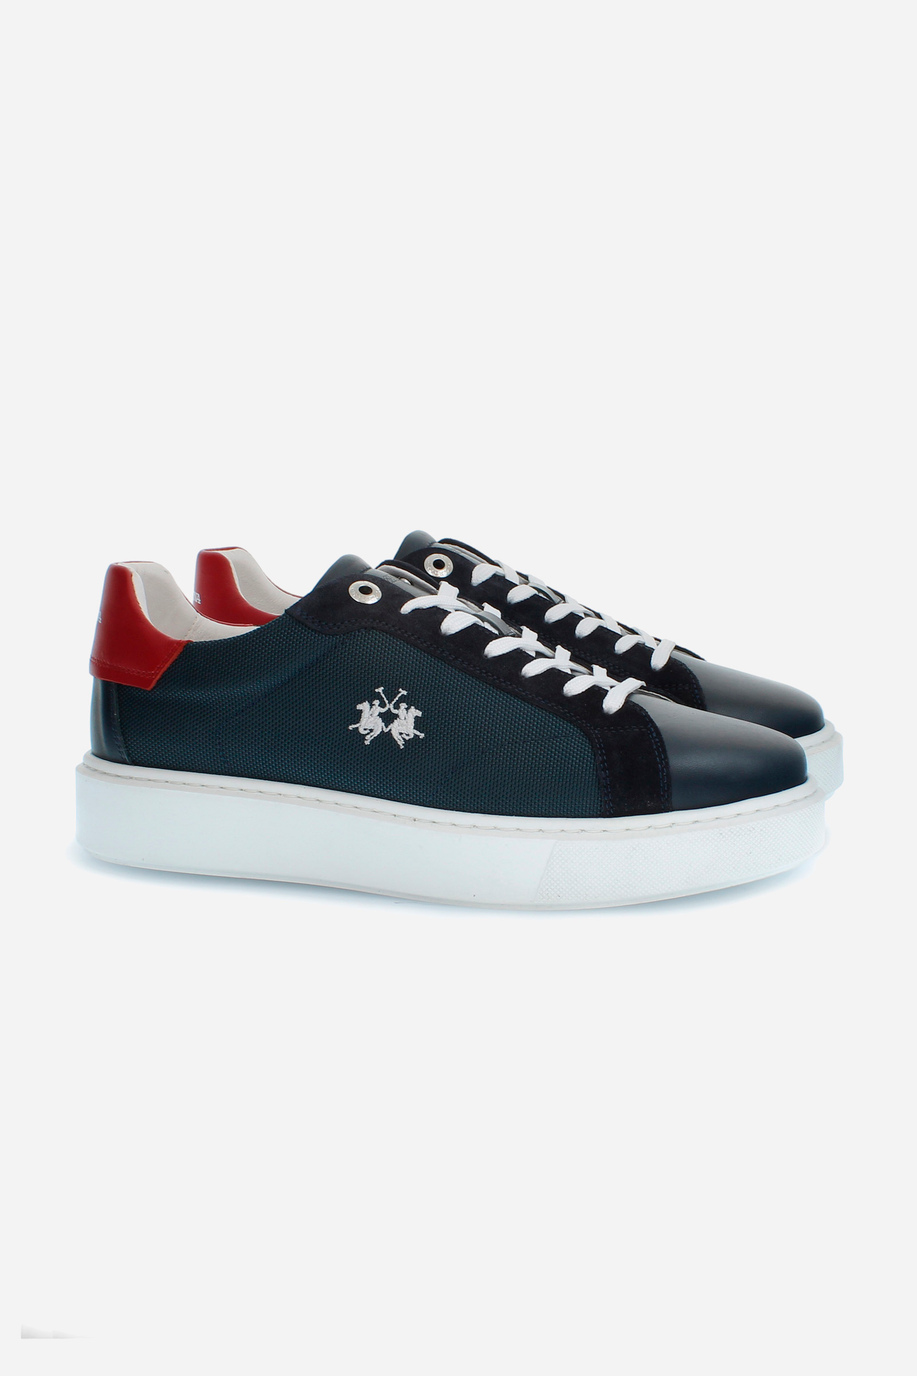 Men's trainers in leather and suede - Shoes and Accessories | La Martina - Official Online Shop